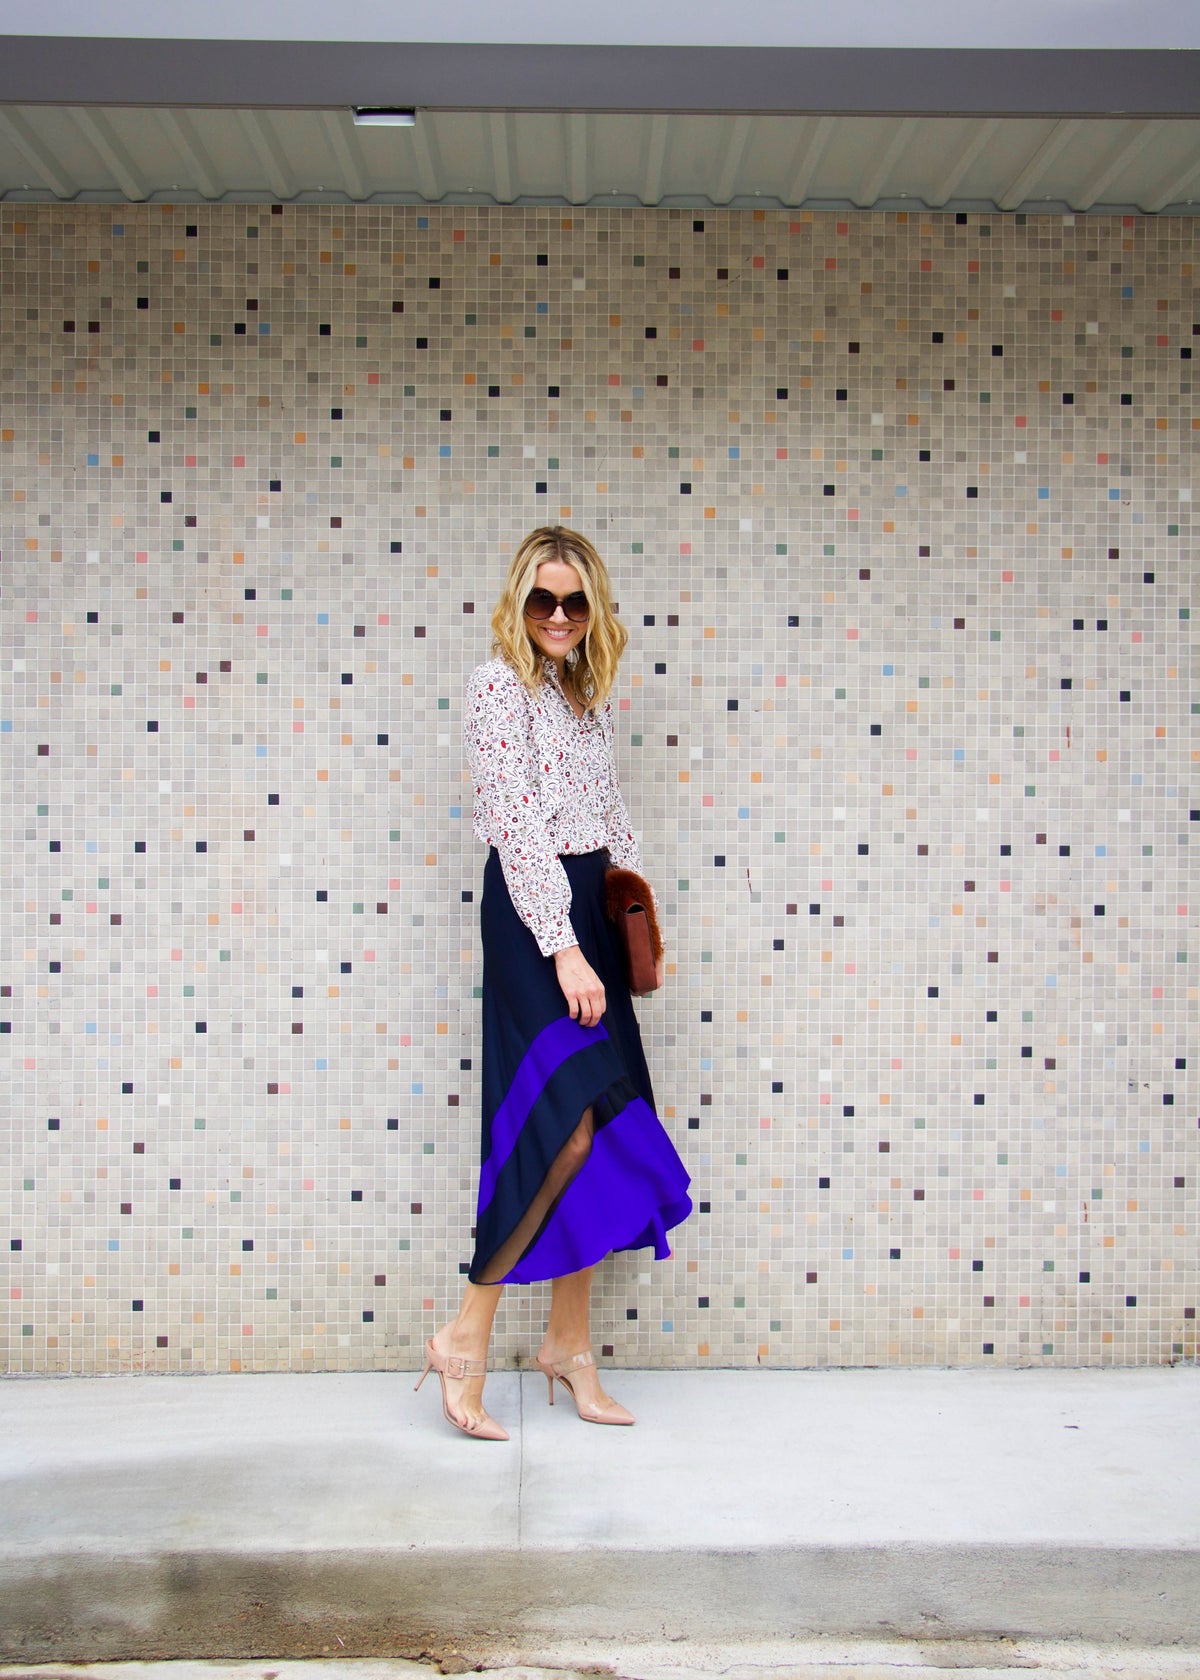 The Skirt Obsession Lives On | 12 fab fall skirts – Only on The Avenue